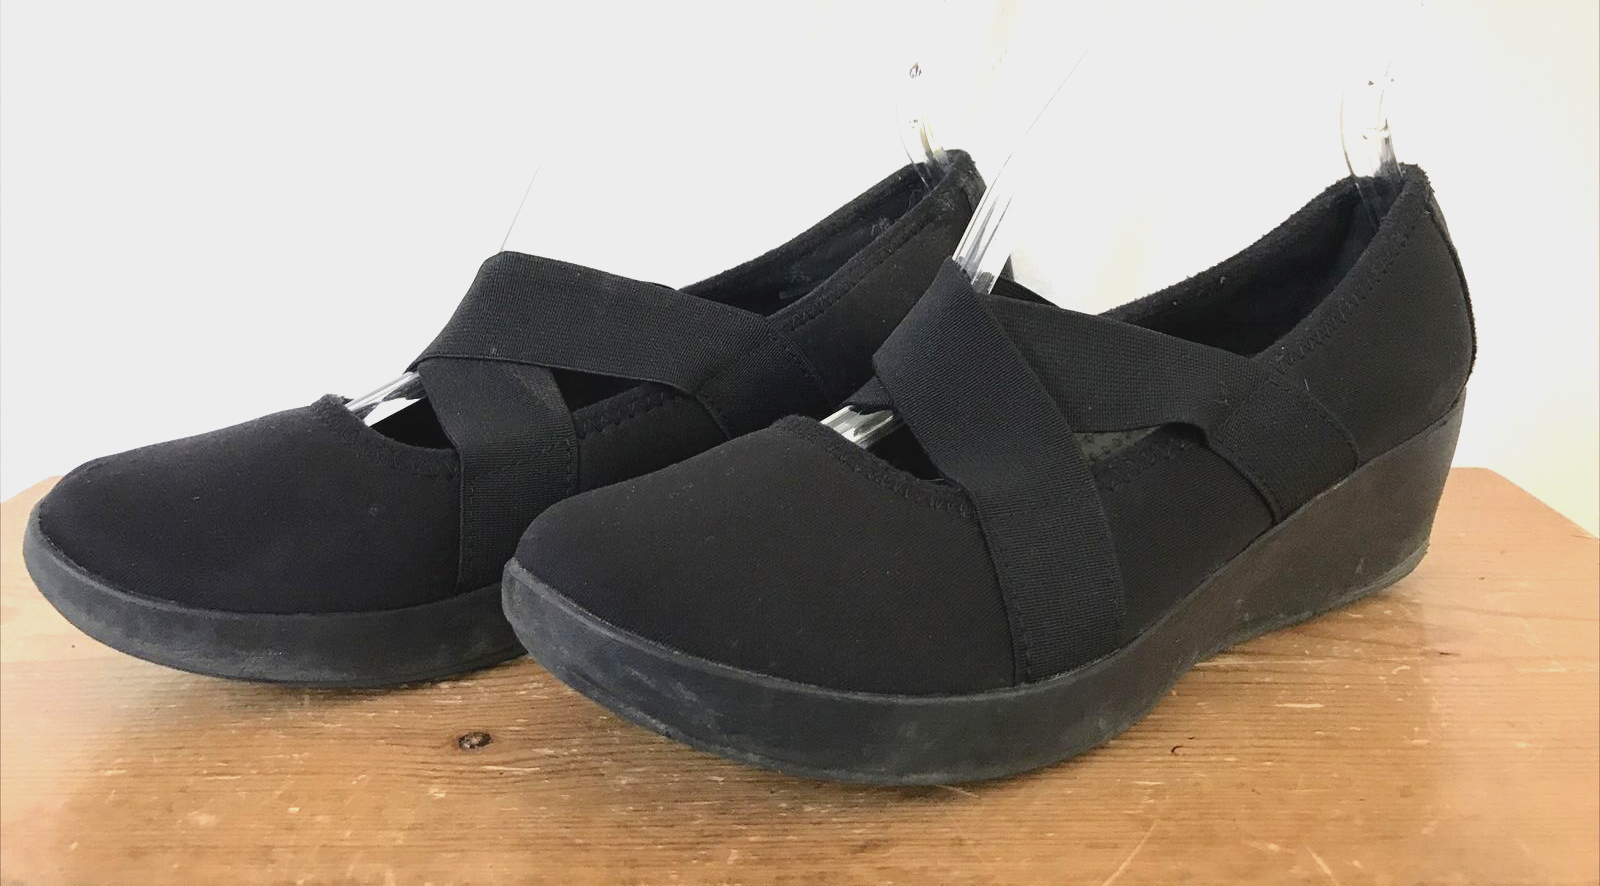 Primary image for Crocs Dual Comfort Black Criss Cross Mary Jane Wedge Shoes 8 38